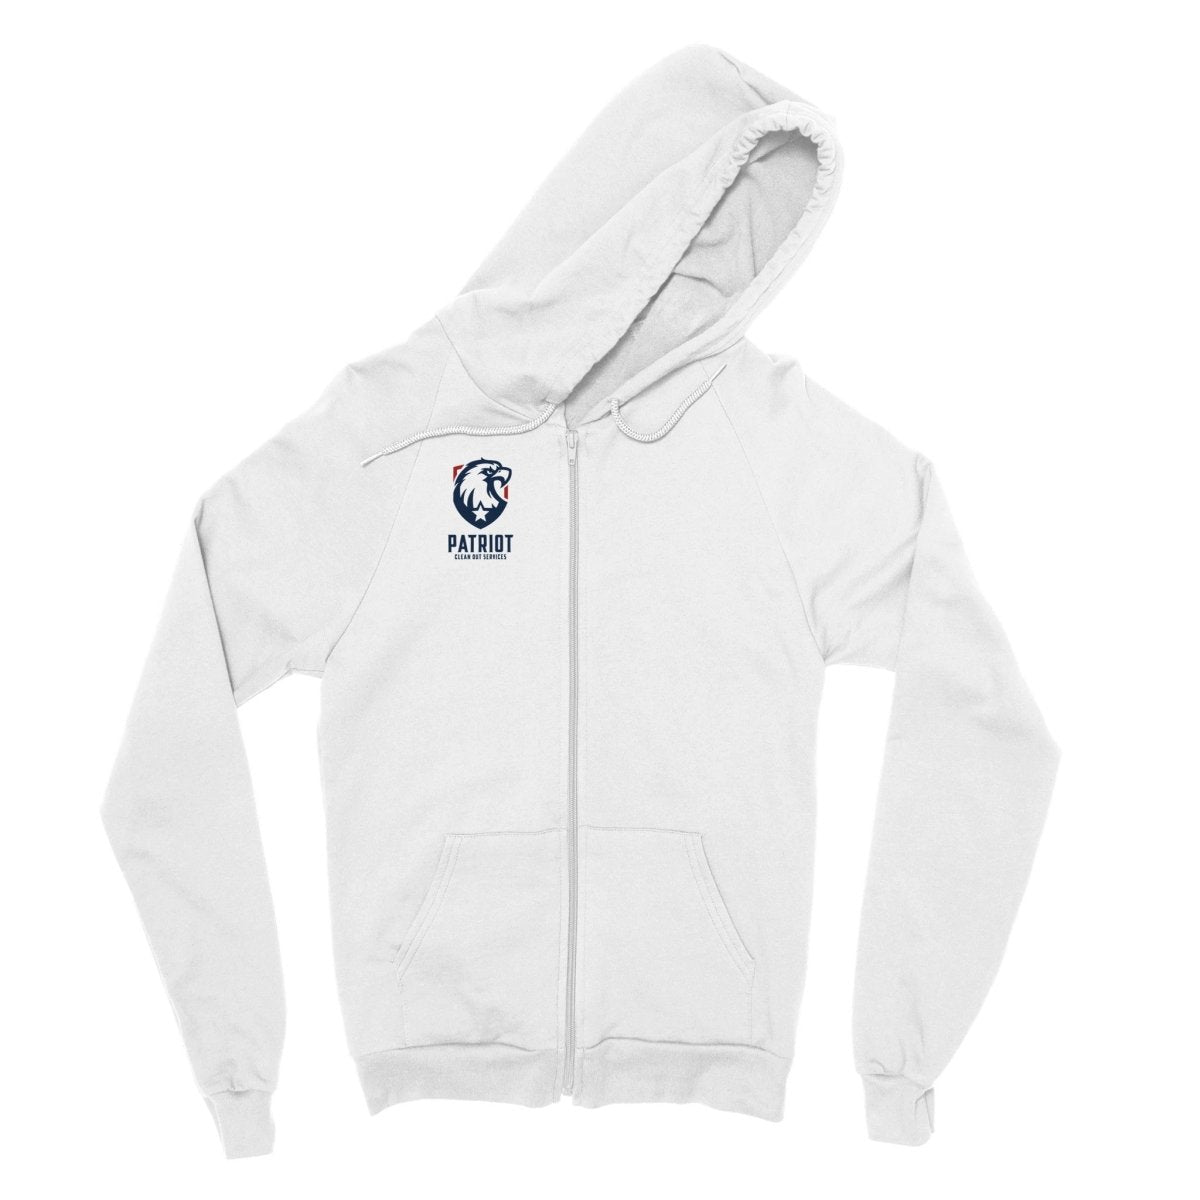 Classic Unisex Patriotic Zip Up Hoodie with Patriot Clean Out logo - Print Material - White